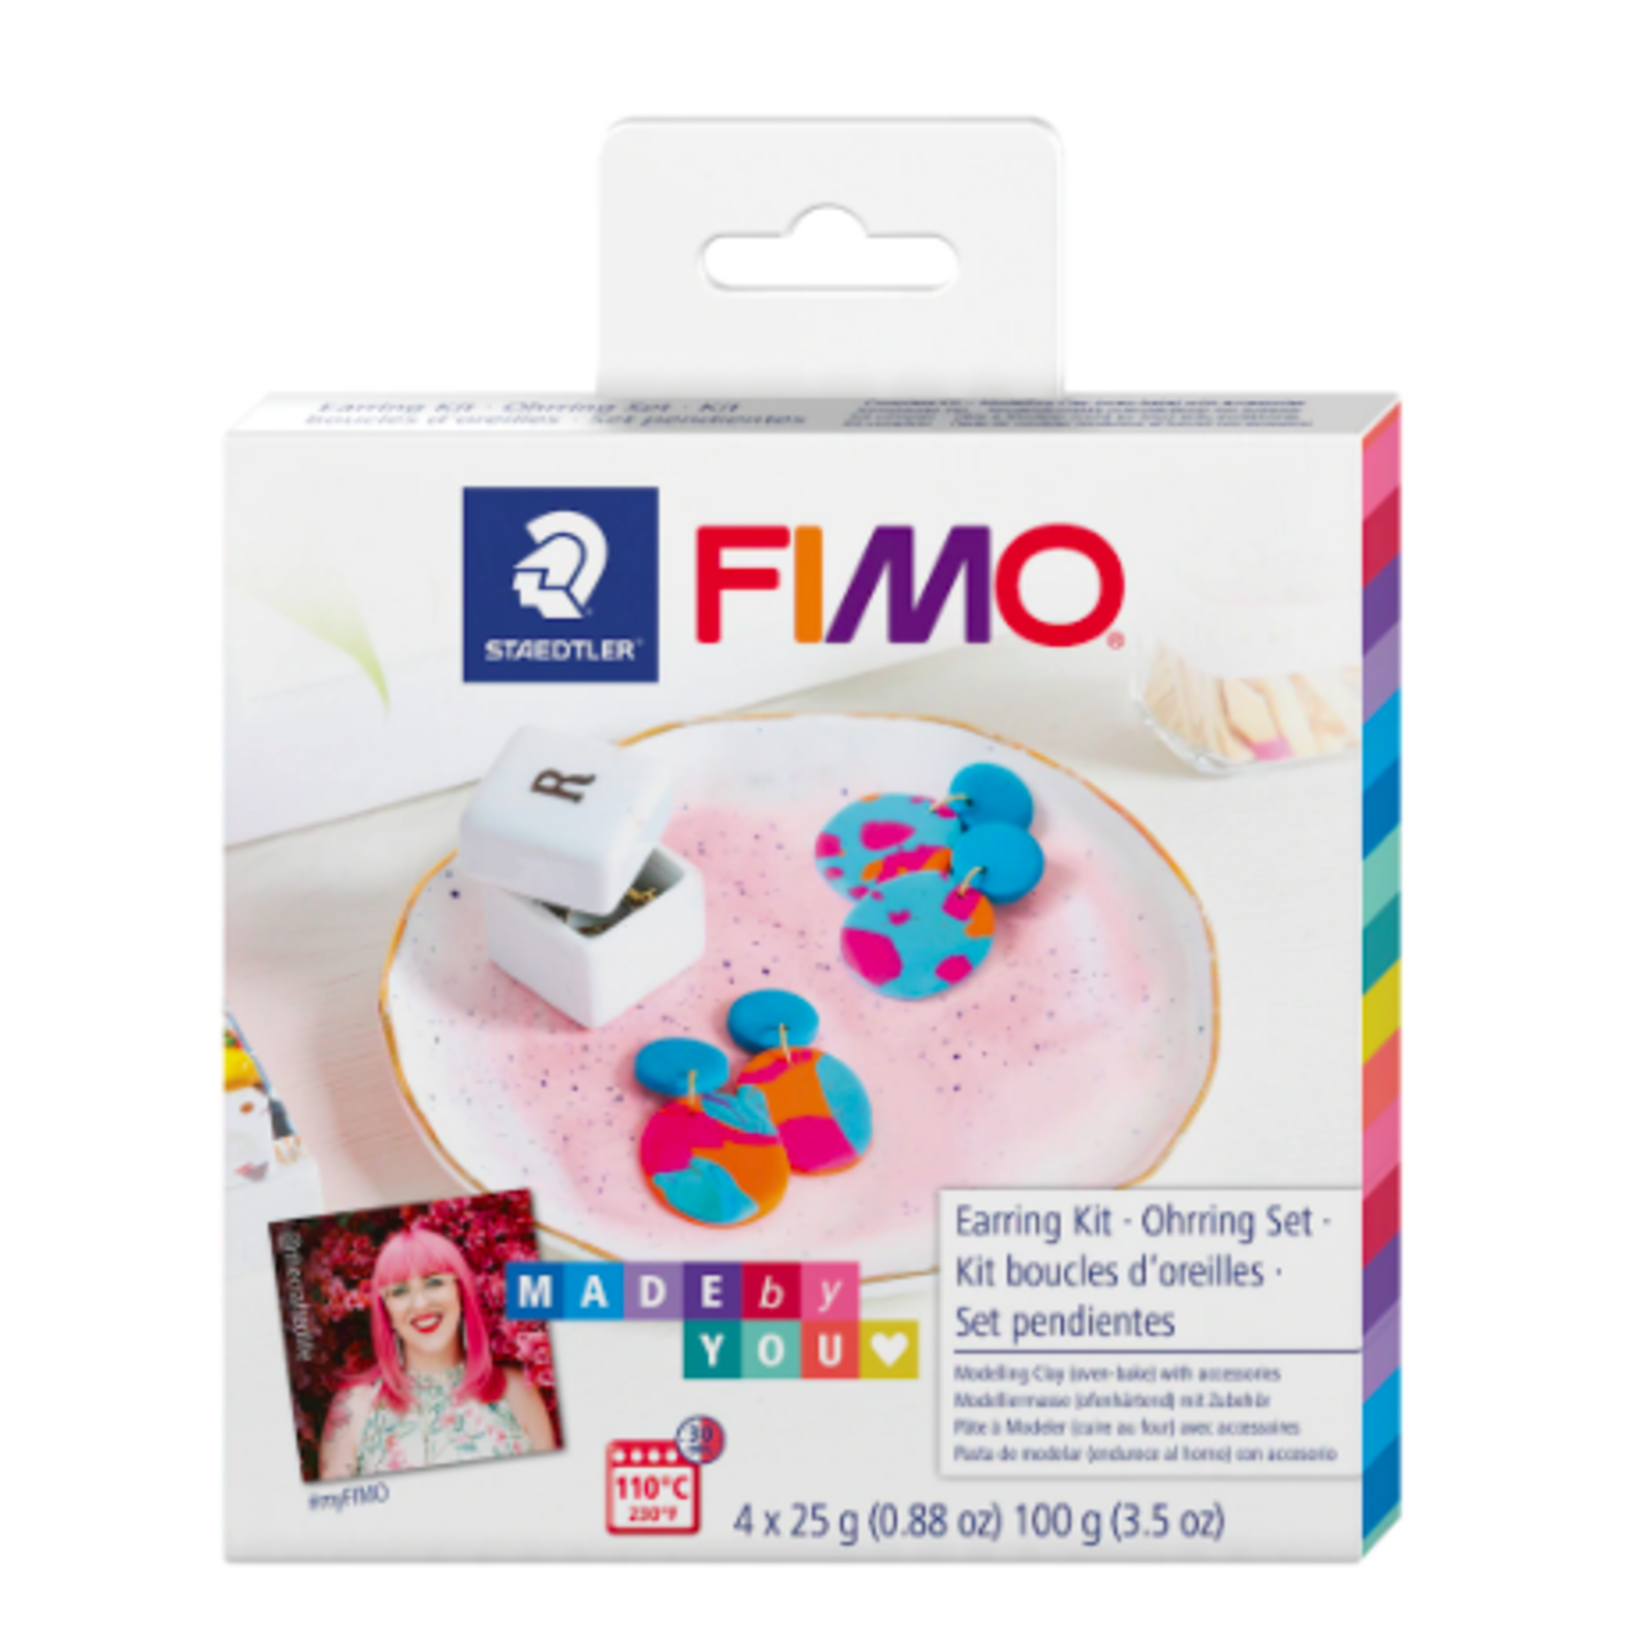 FIMO MADE BY YOU EARRINGS